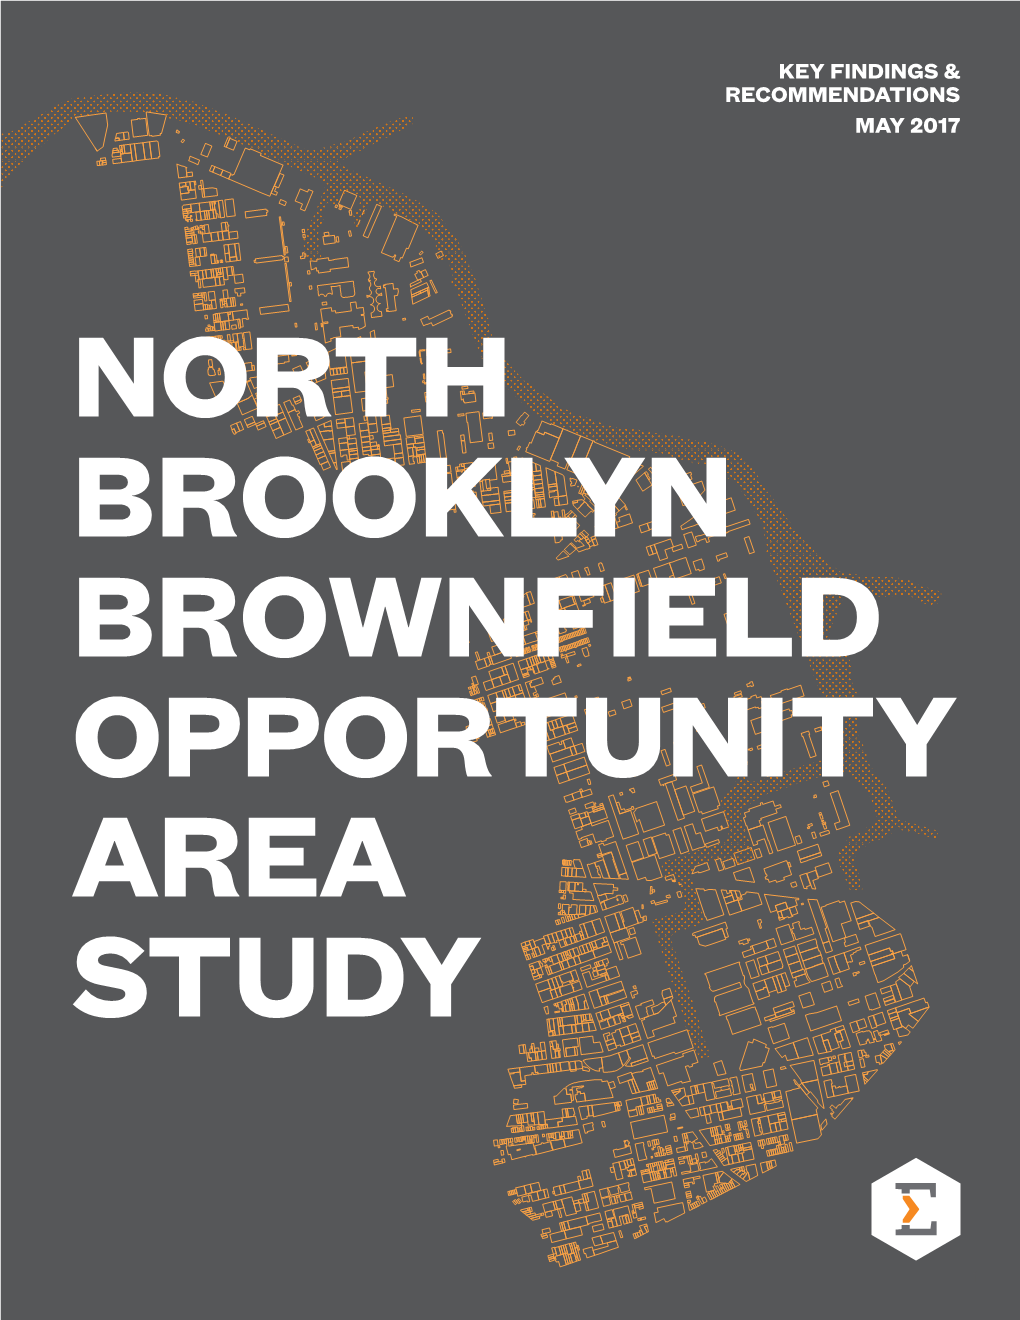 North Brooklyn Brownfield Opportunity Area Study